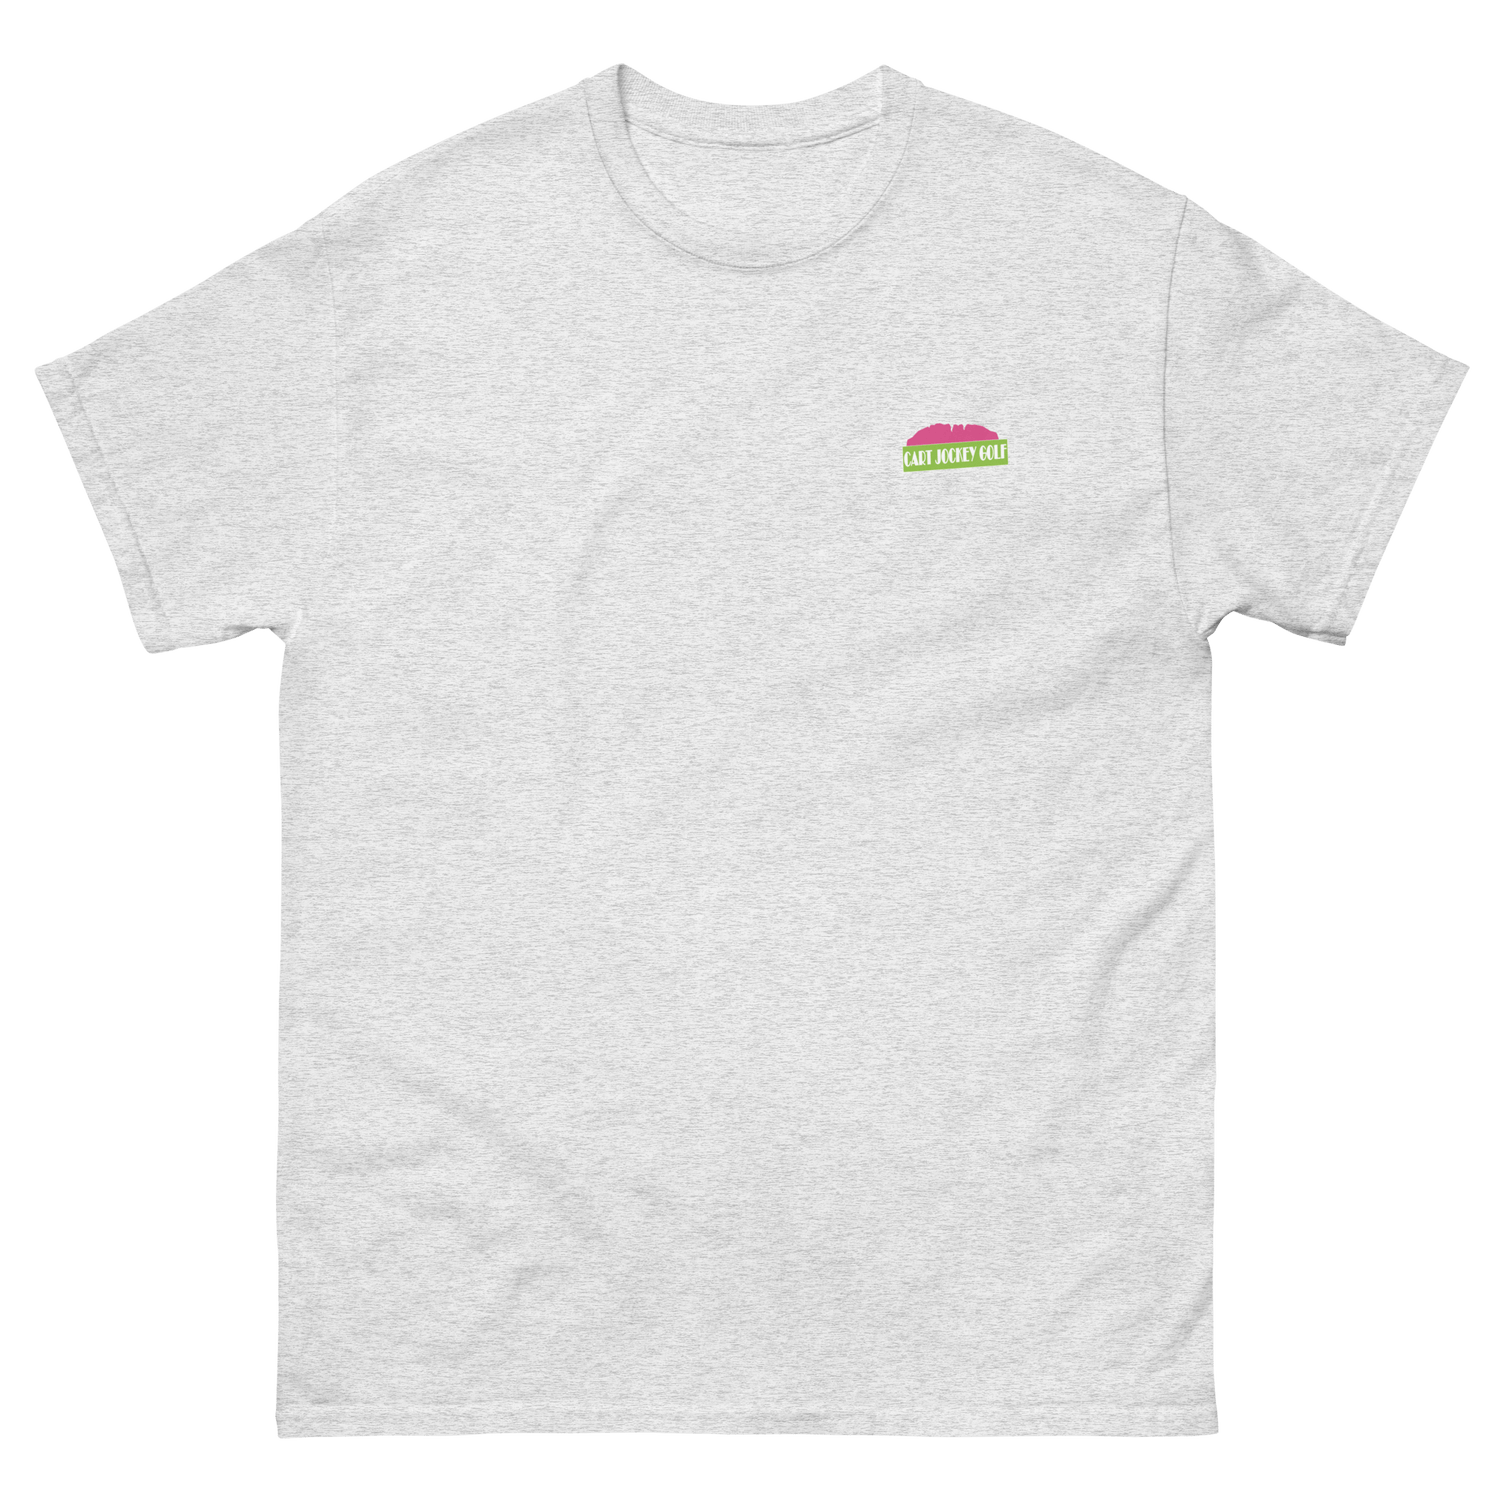 a Men's Origin tee from Cart Jockey Golf with a pink and green logo on it.